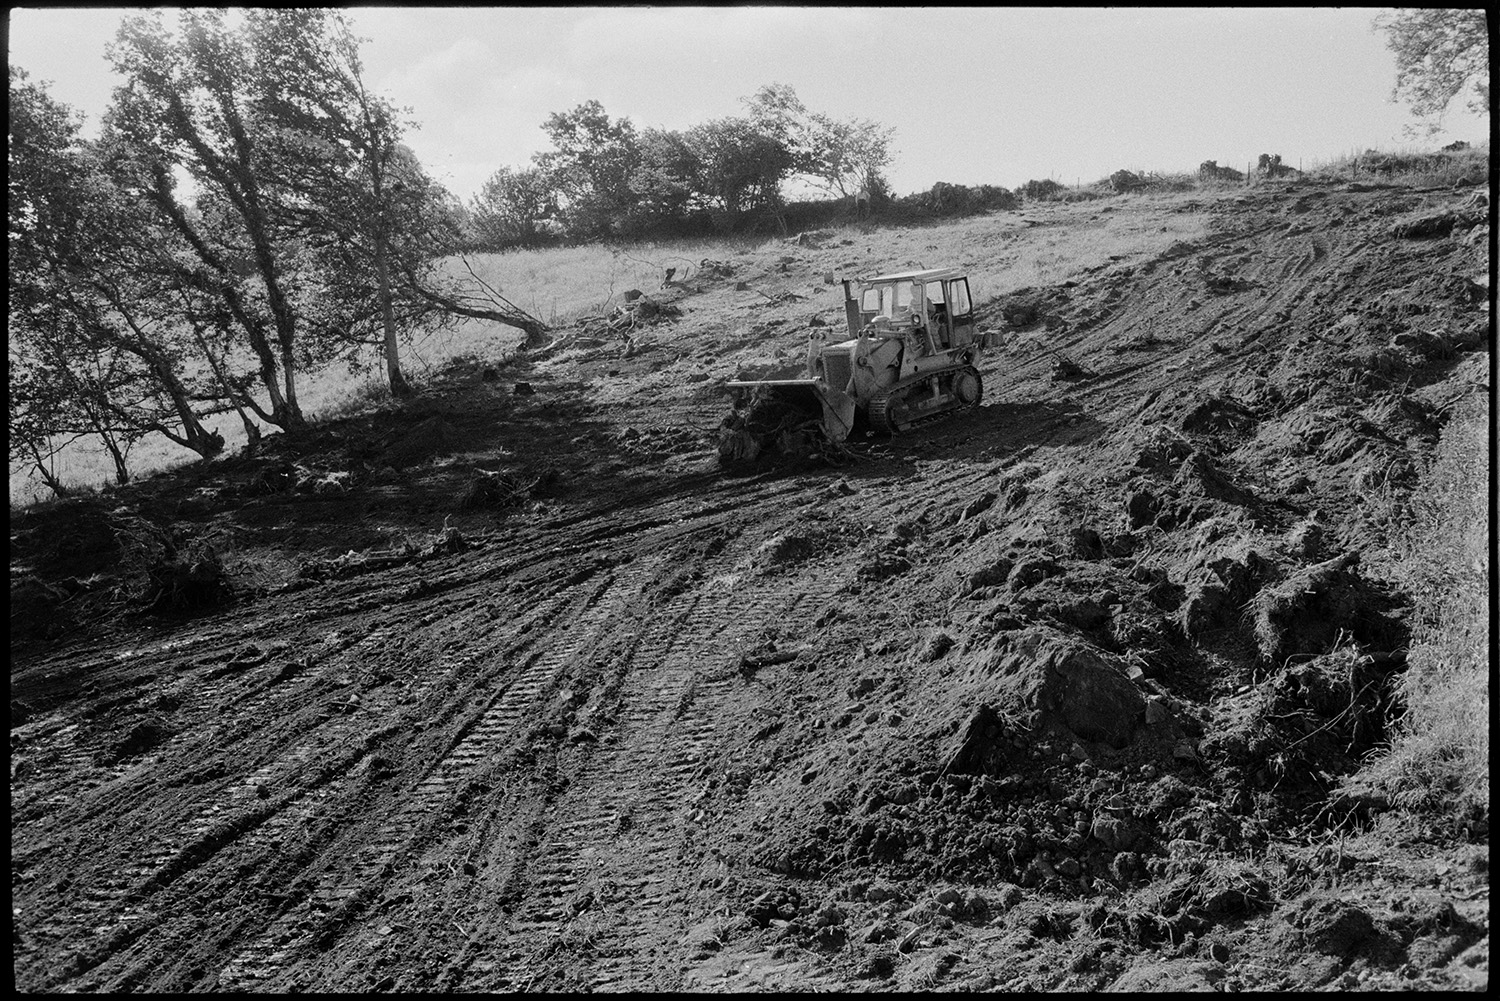 Bulldozer clearing trees from small wood to make pasture.
[A bulldozer clearing a muddy area for pasture above Millhams, Dolton. Trees and field boundaries are visible in the background.]